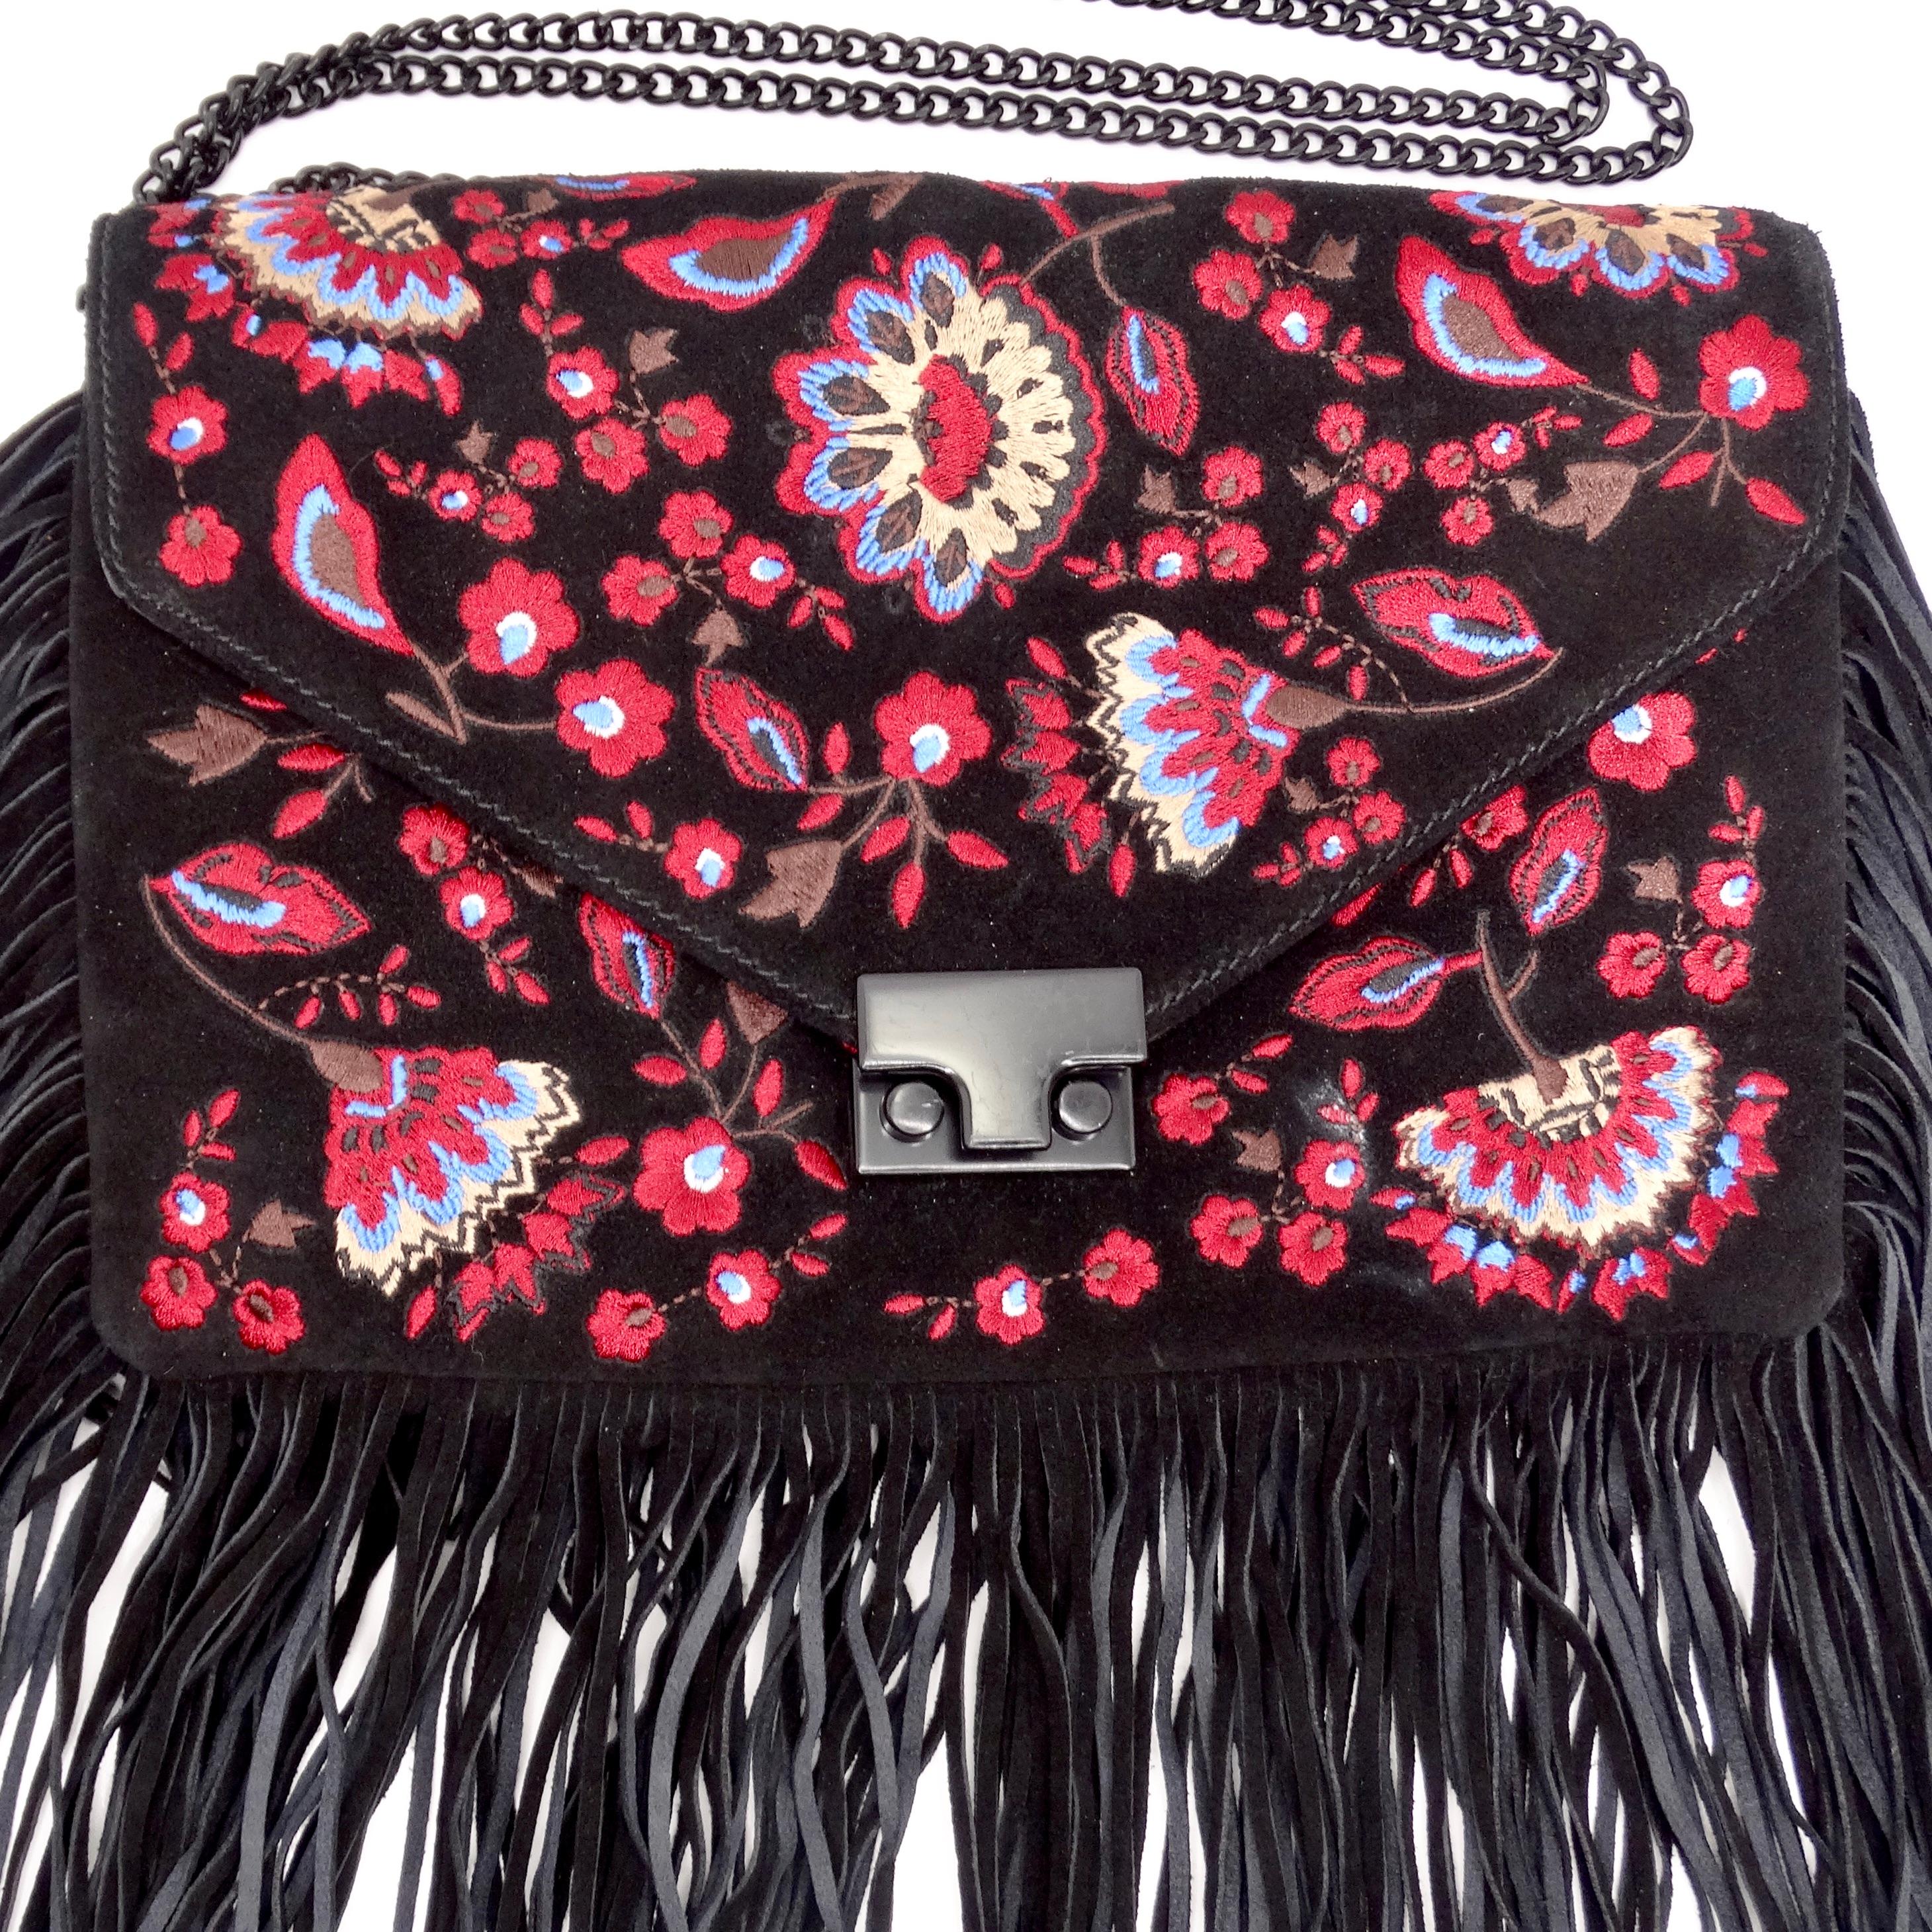 Introducing the Loeffler Randall Embroidered Suede Fringe Handbag, a vibrant and bold statement piece that exudes bohemian charm and effortless style. Crafted from luxurious black suede, this fold-over handbag features stunning multicolor floral